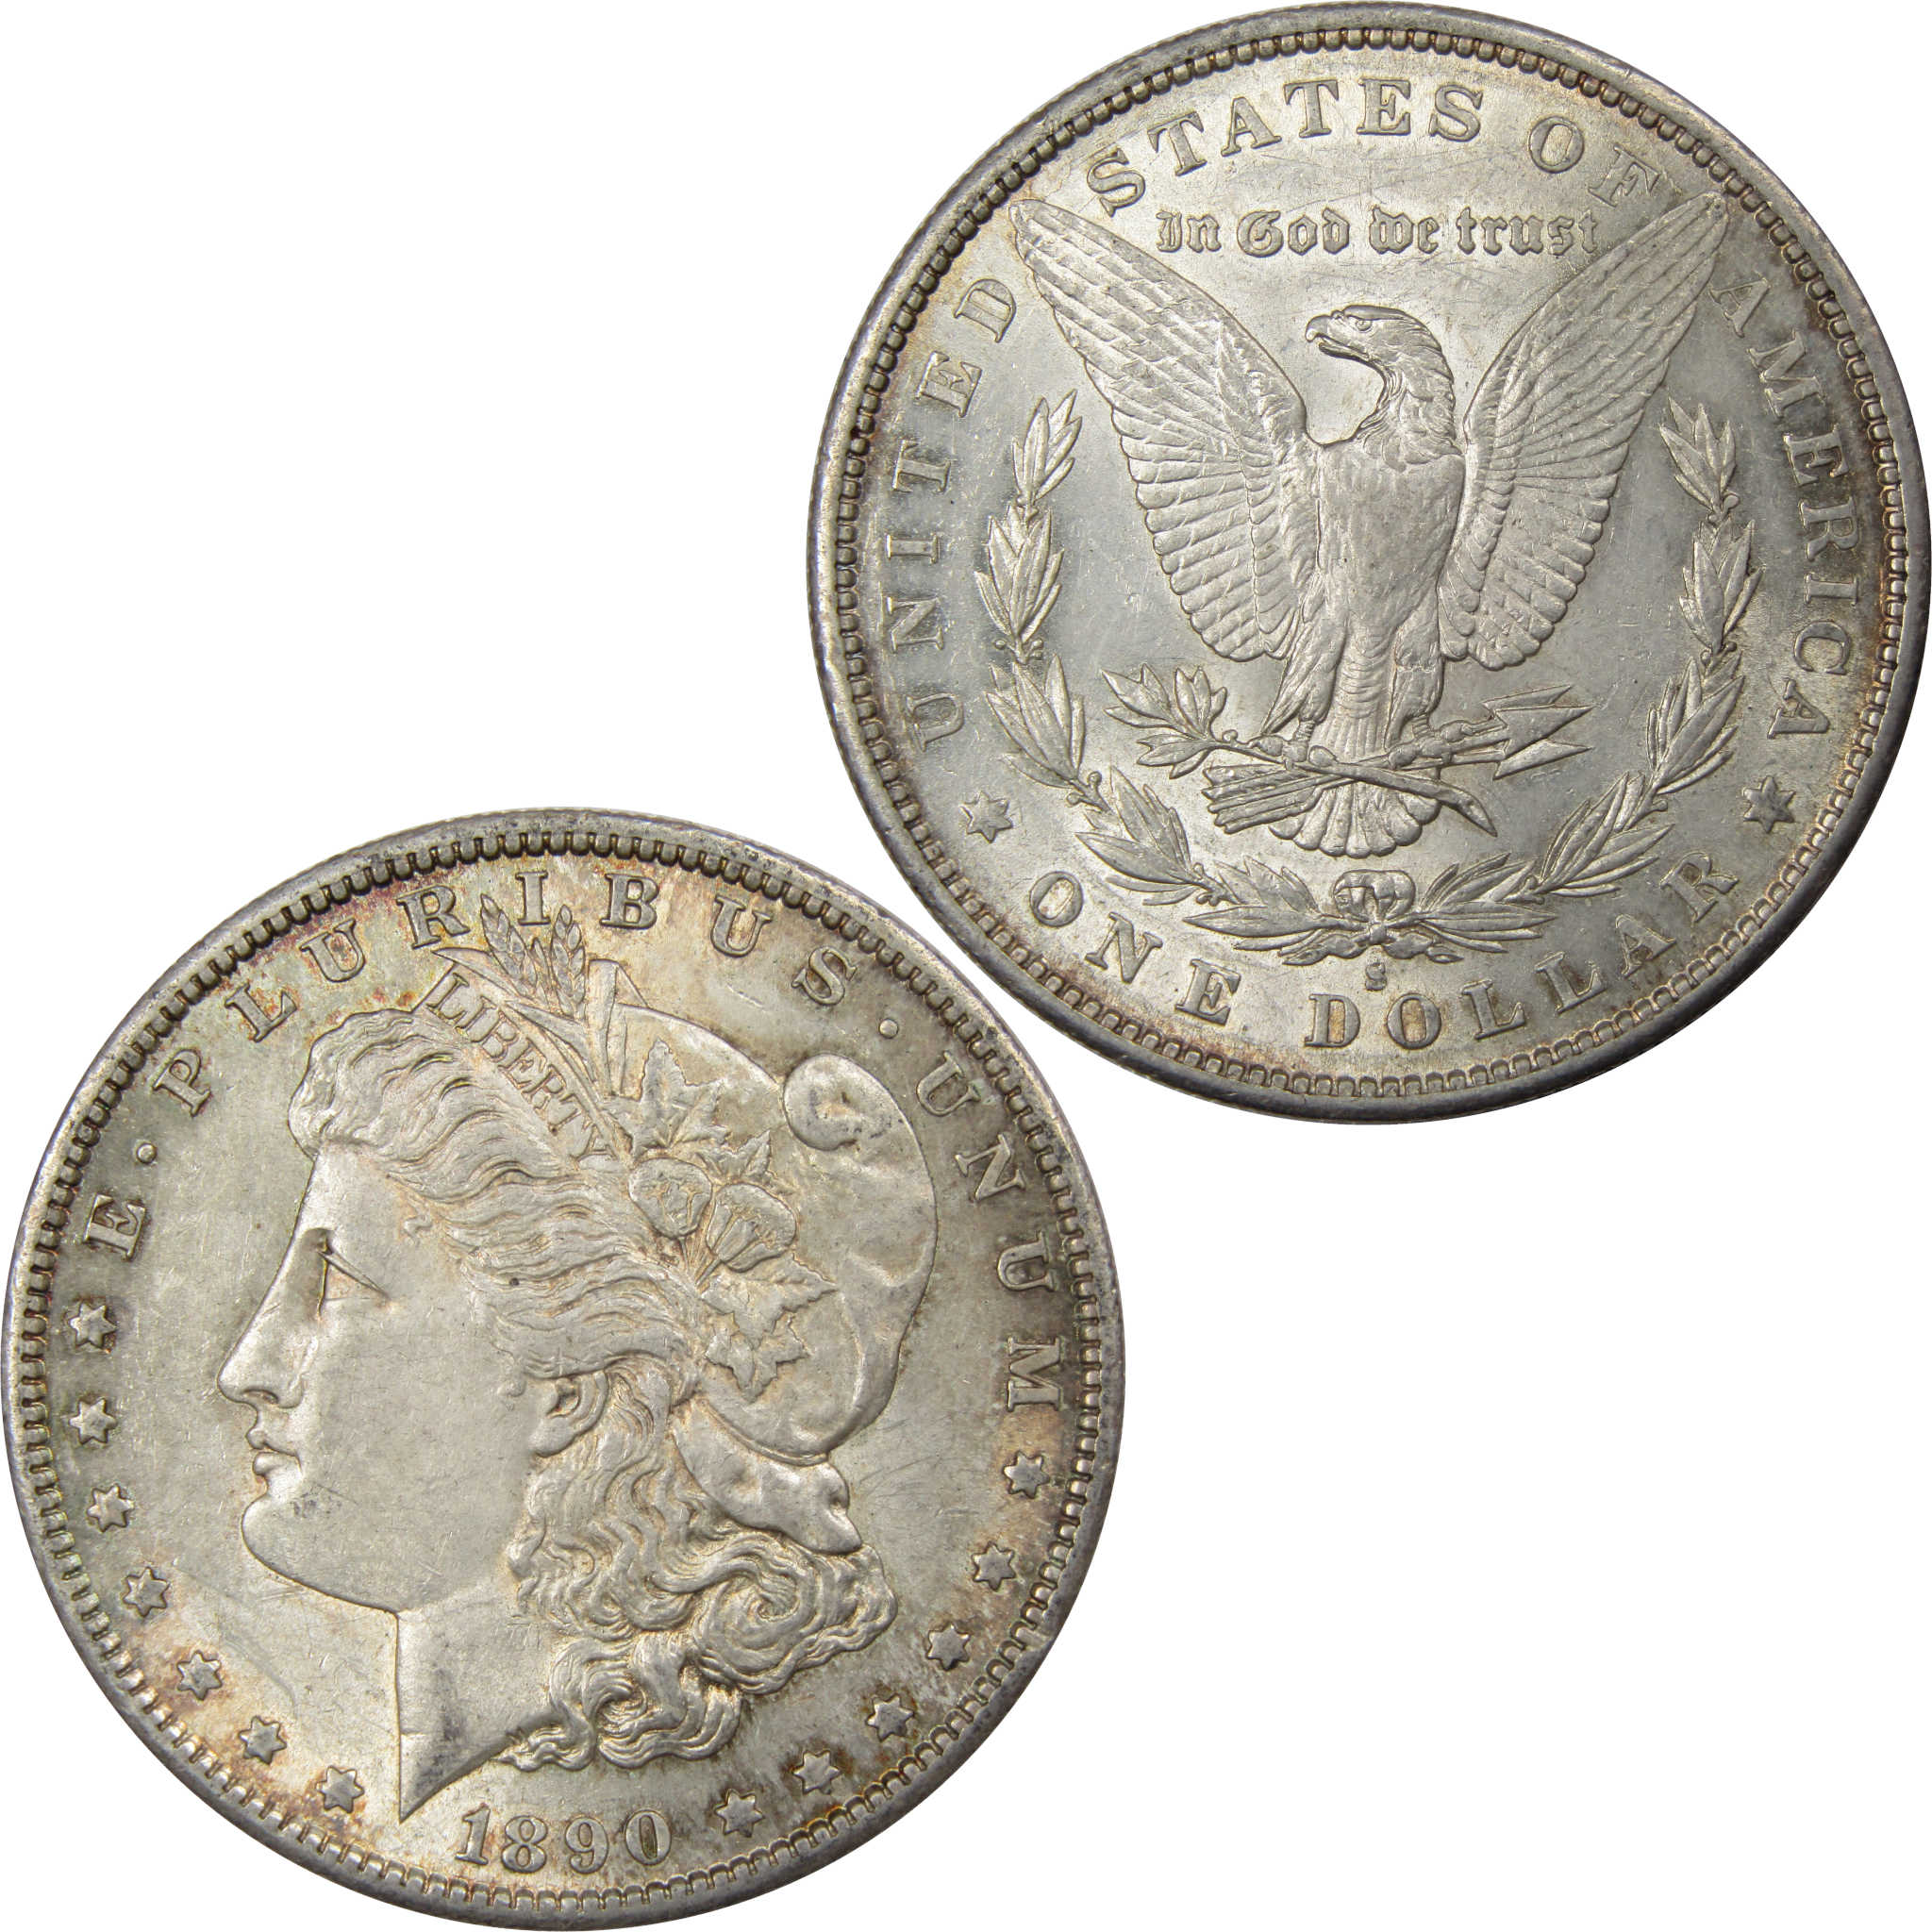 1890 S Morgan Dollar AU About Uncirculated 90% Silver SKU:I1551 - Morgan coin - Morgan silver dollar - Morgan silver dollar for sale - Profile Coins &amp; Collectibles